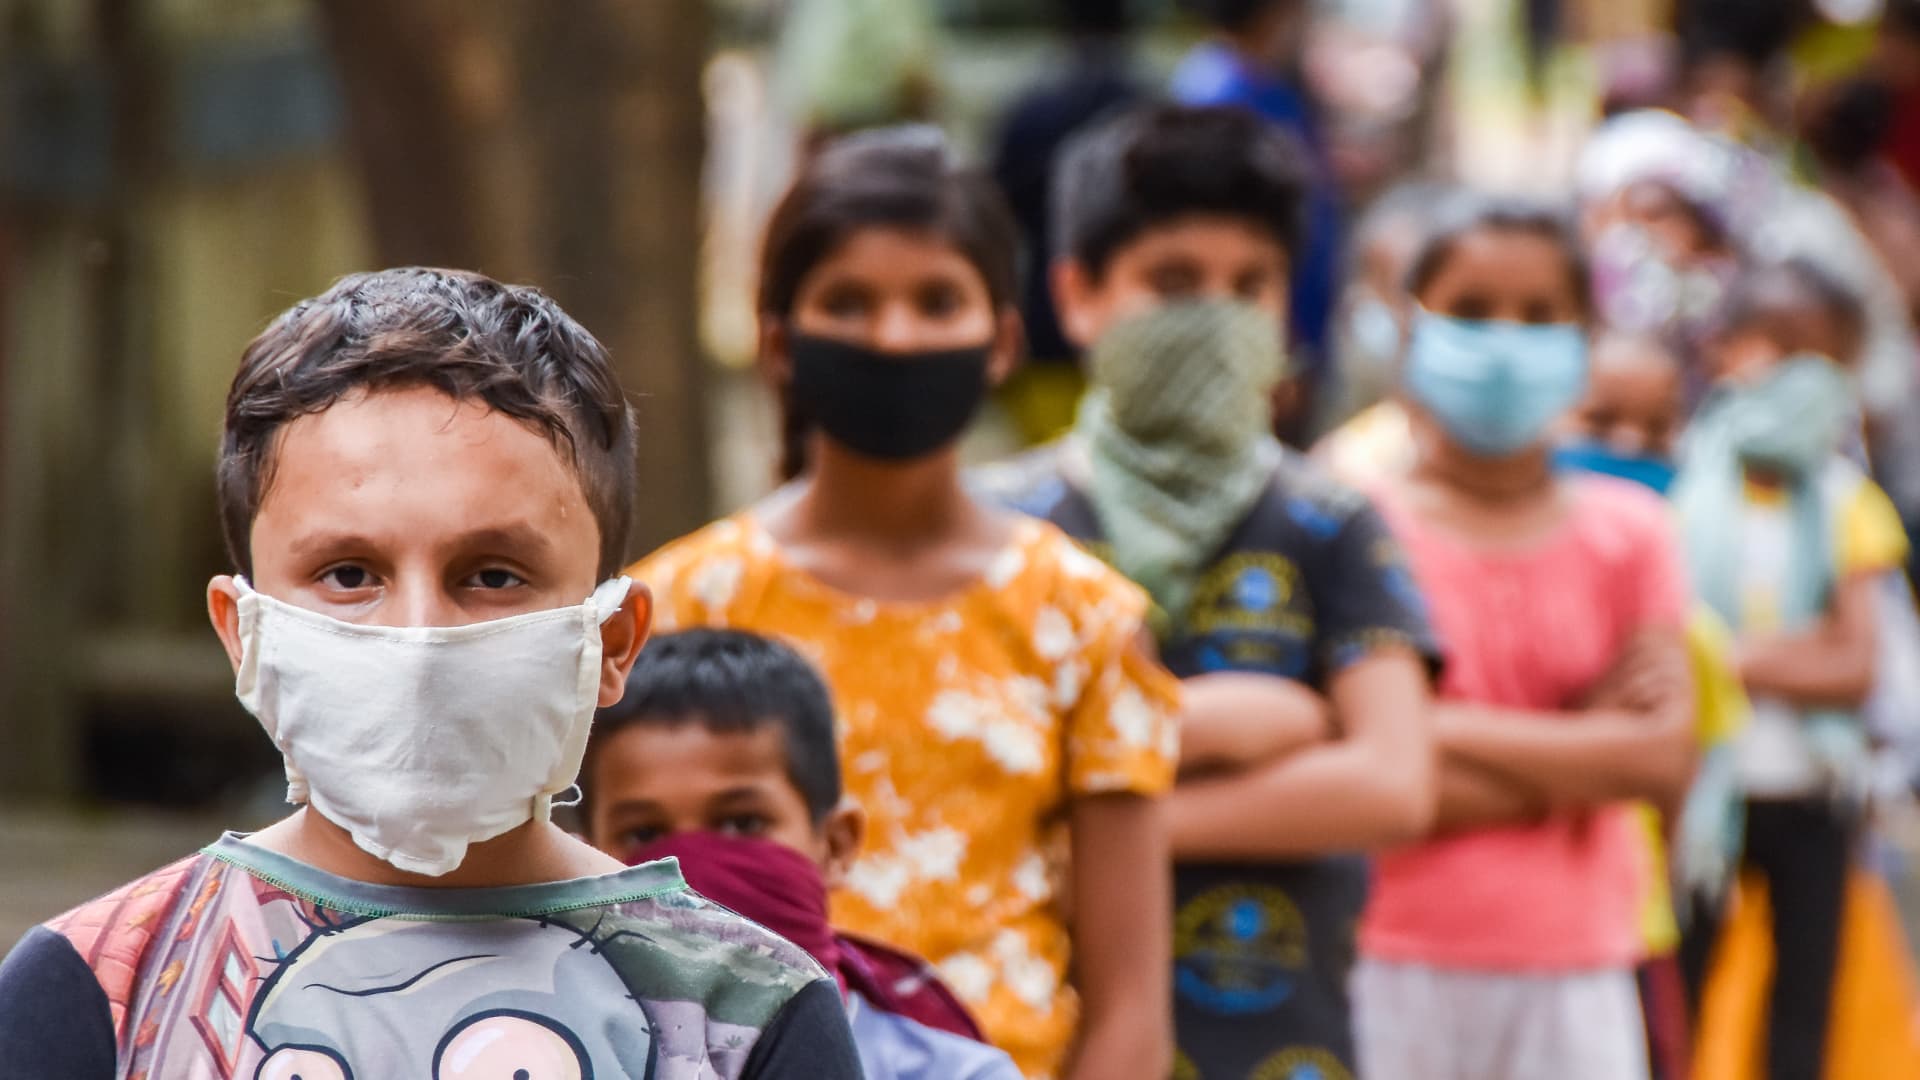 Kids in a queue while wearing face masks during the food distribution amid Coronavirus COVID 19.